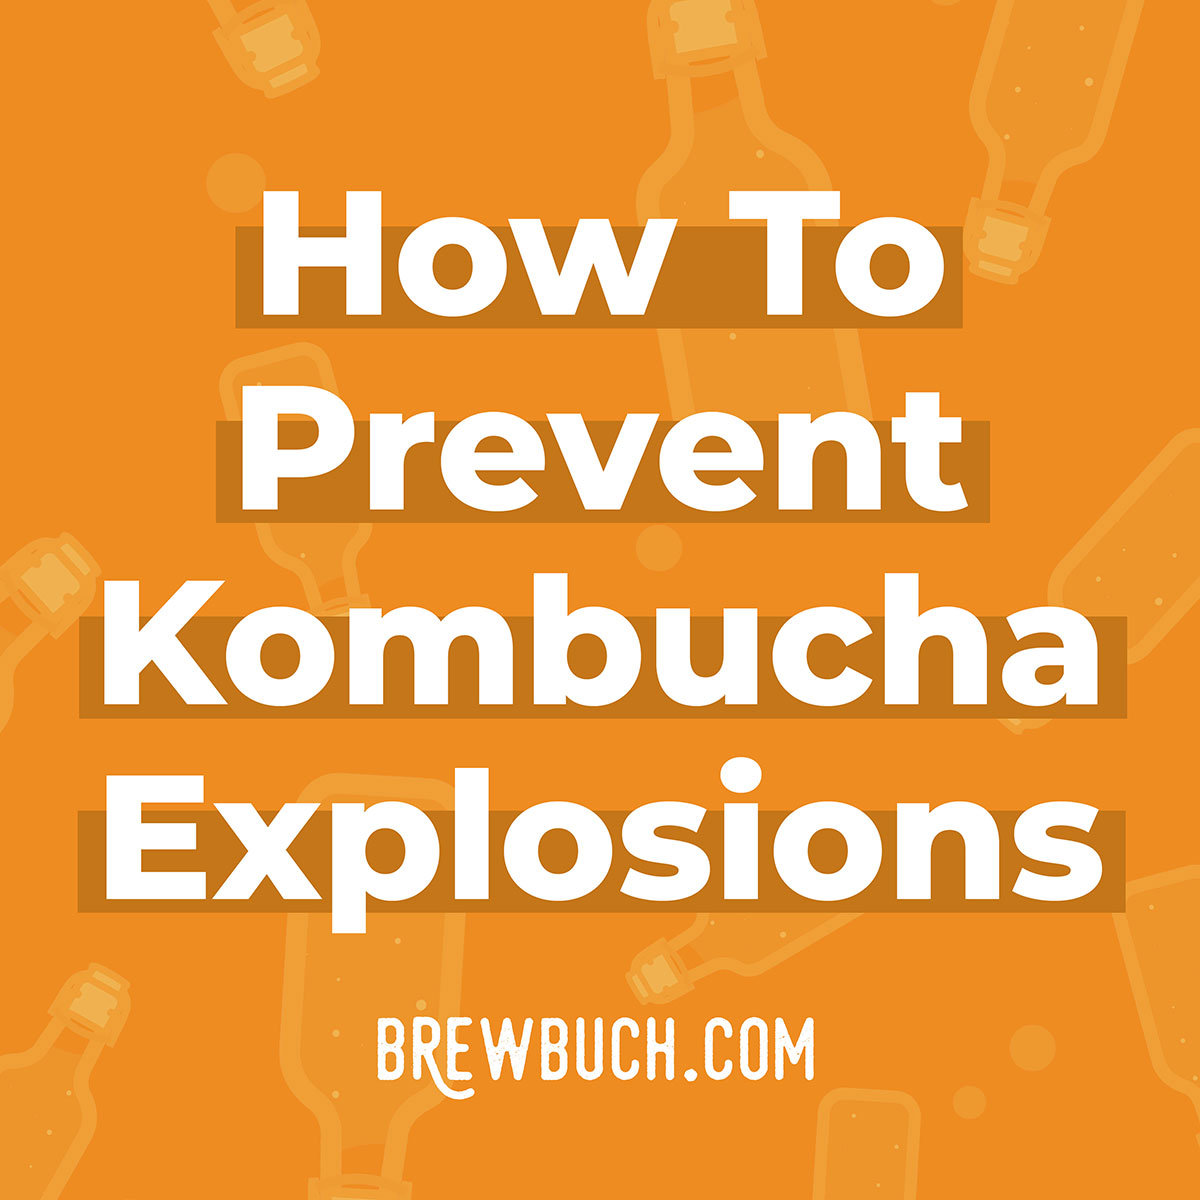 Collage that says "how to prevent kombucha explosions".